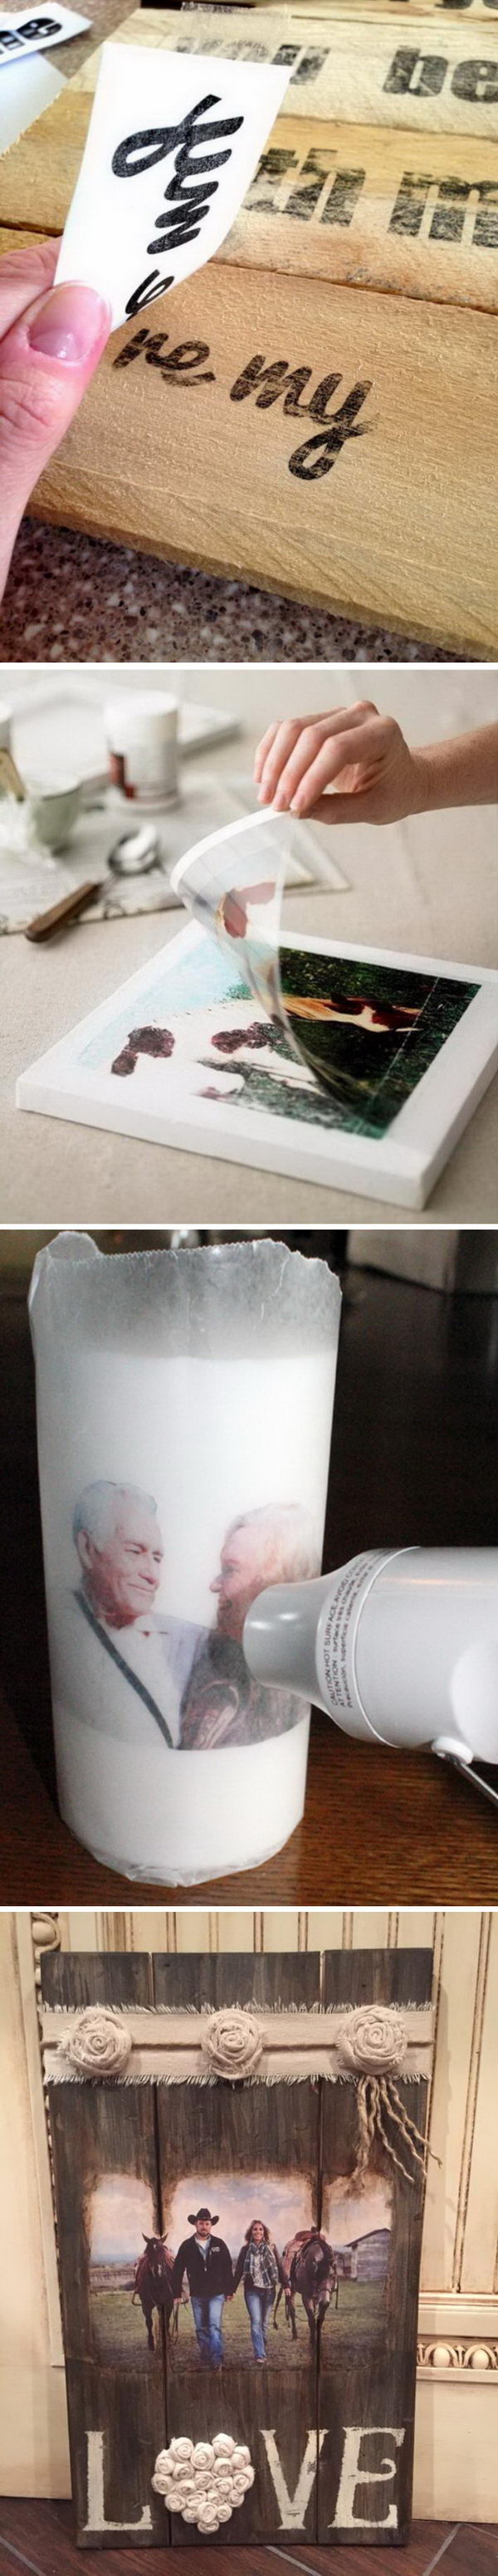 DIY Ideas & Tutorials for Photo Transfer Projects. 